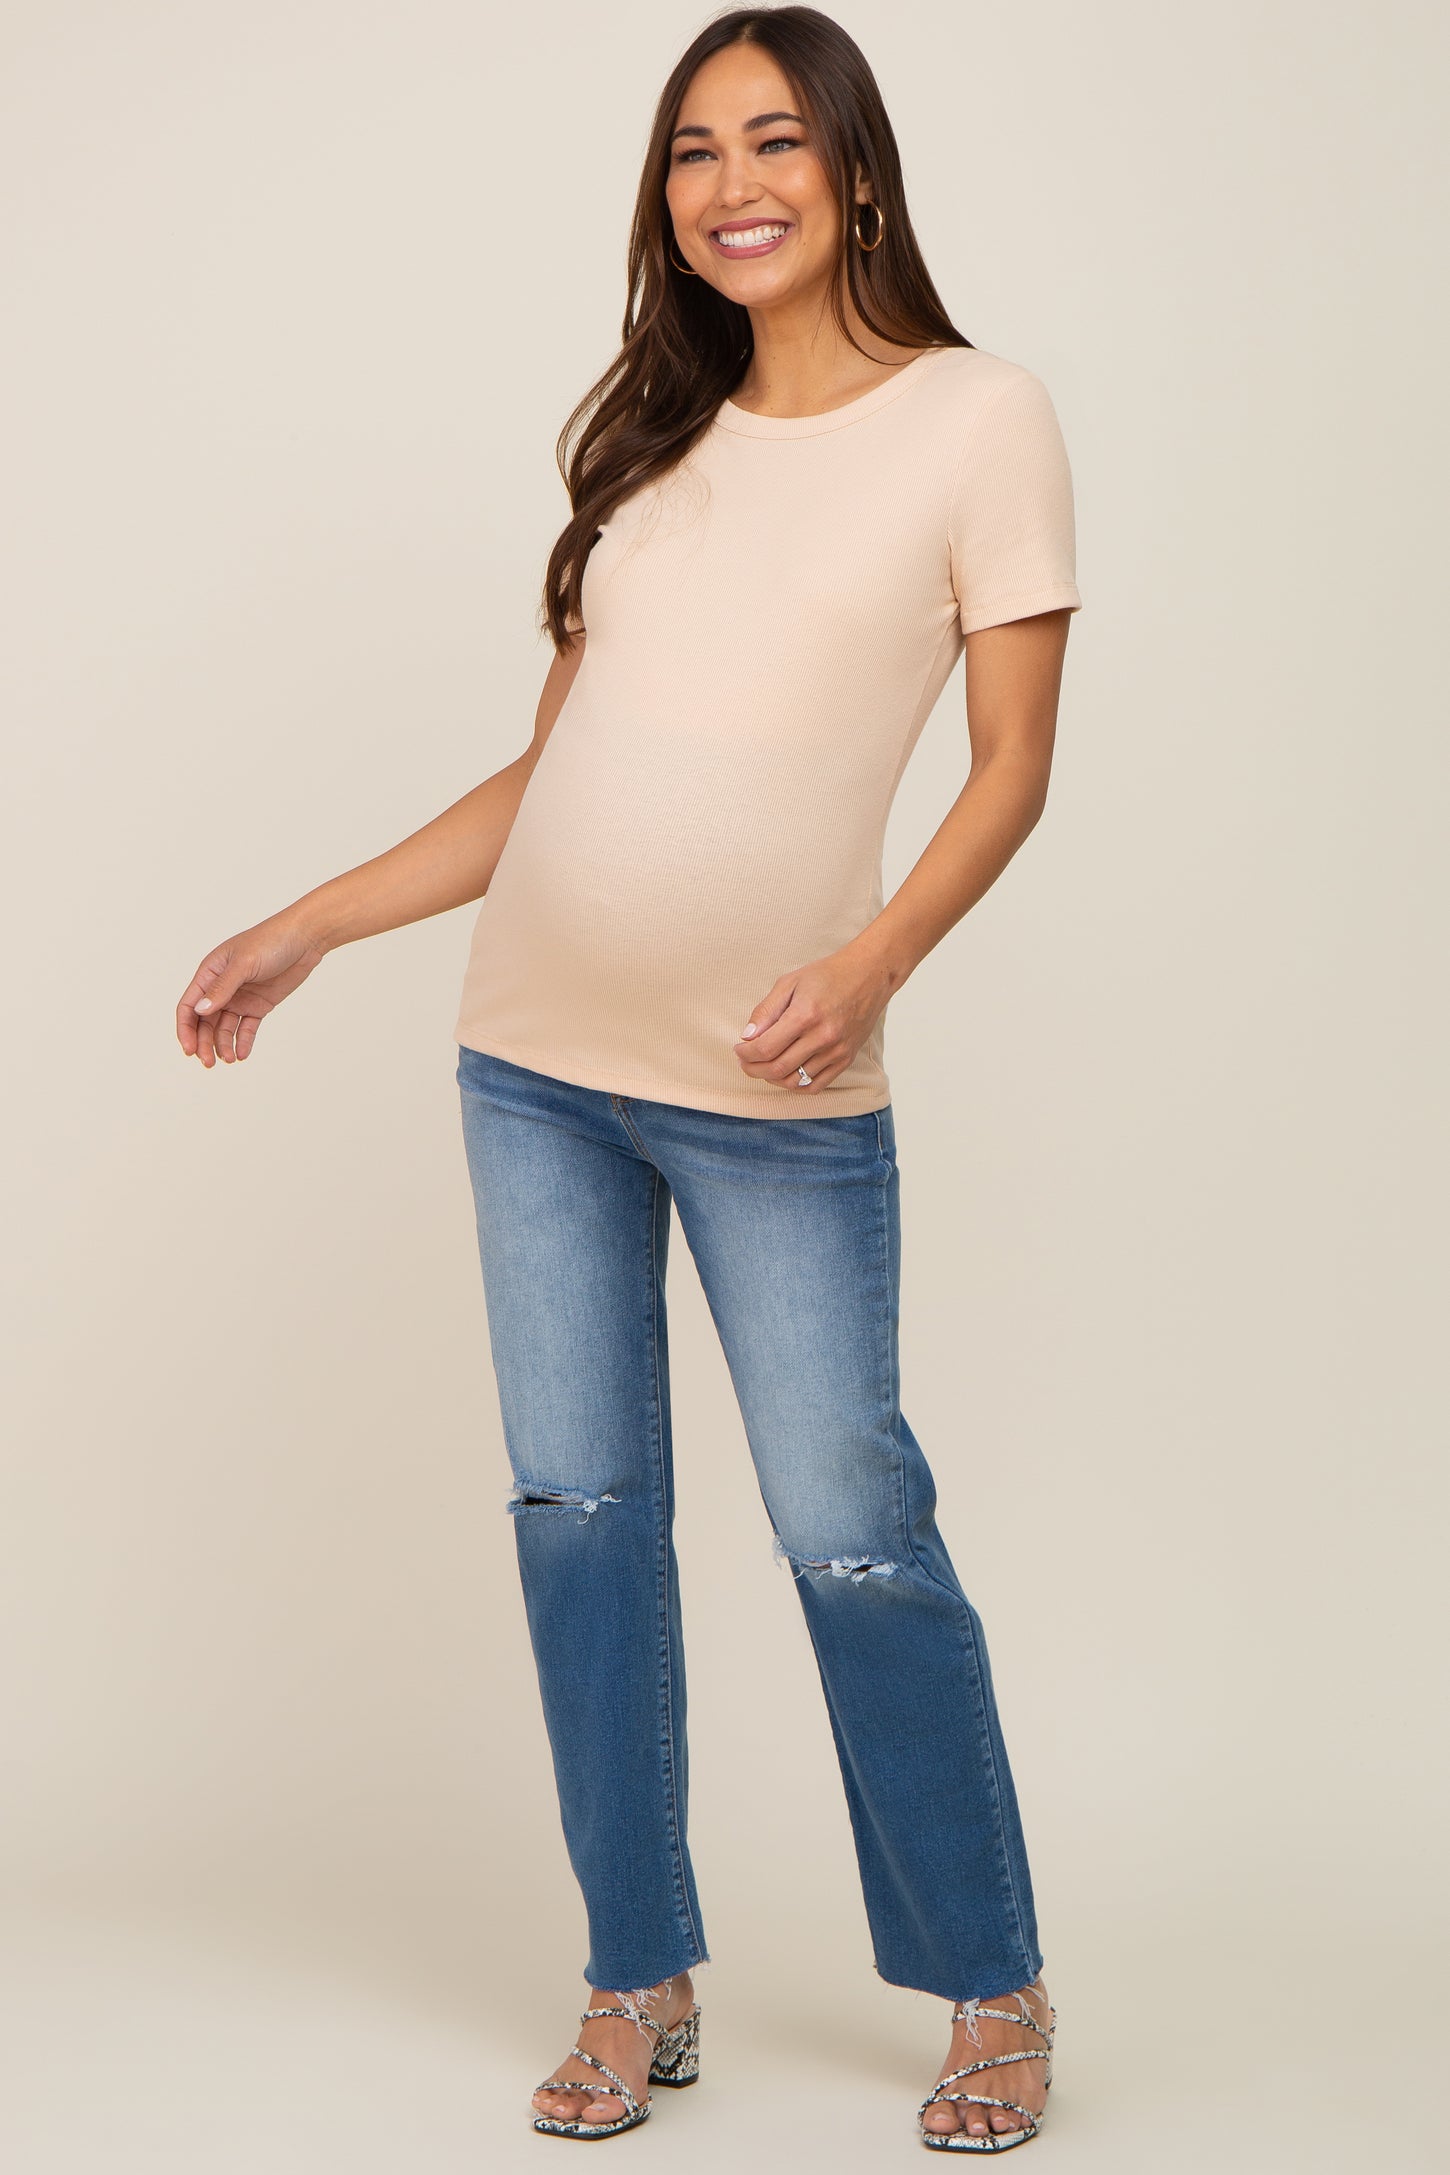 Beige Ribbed Short Sleeve Maternity Top